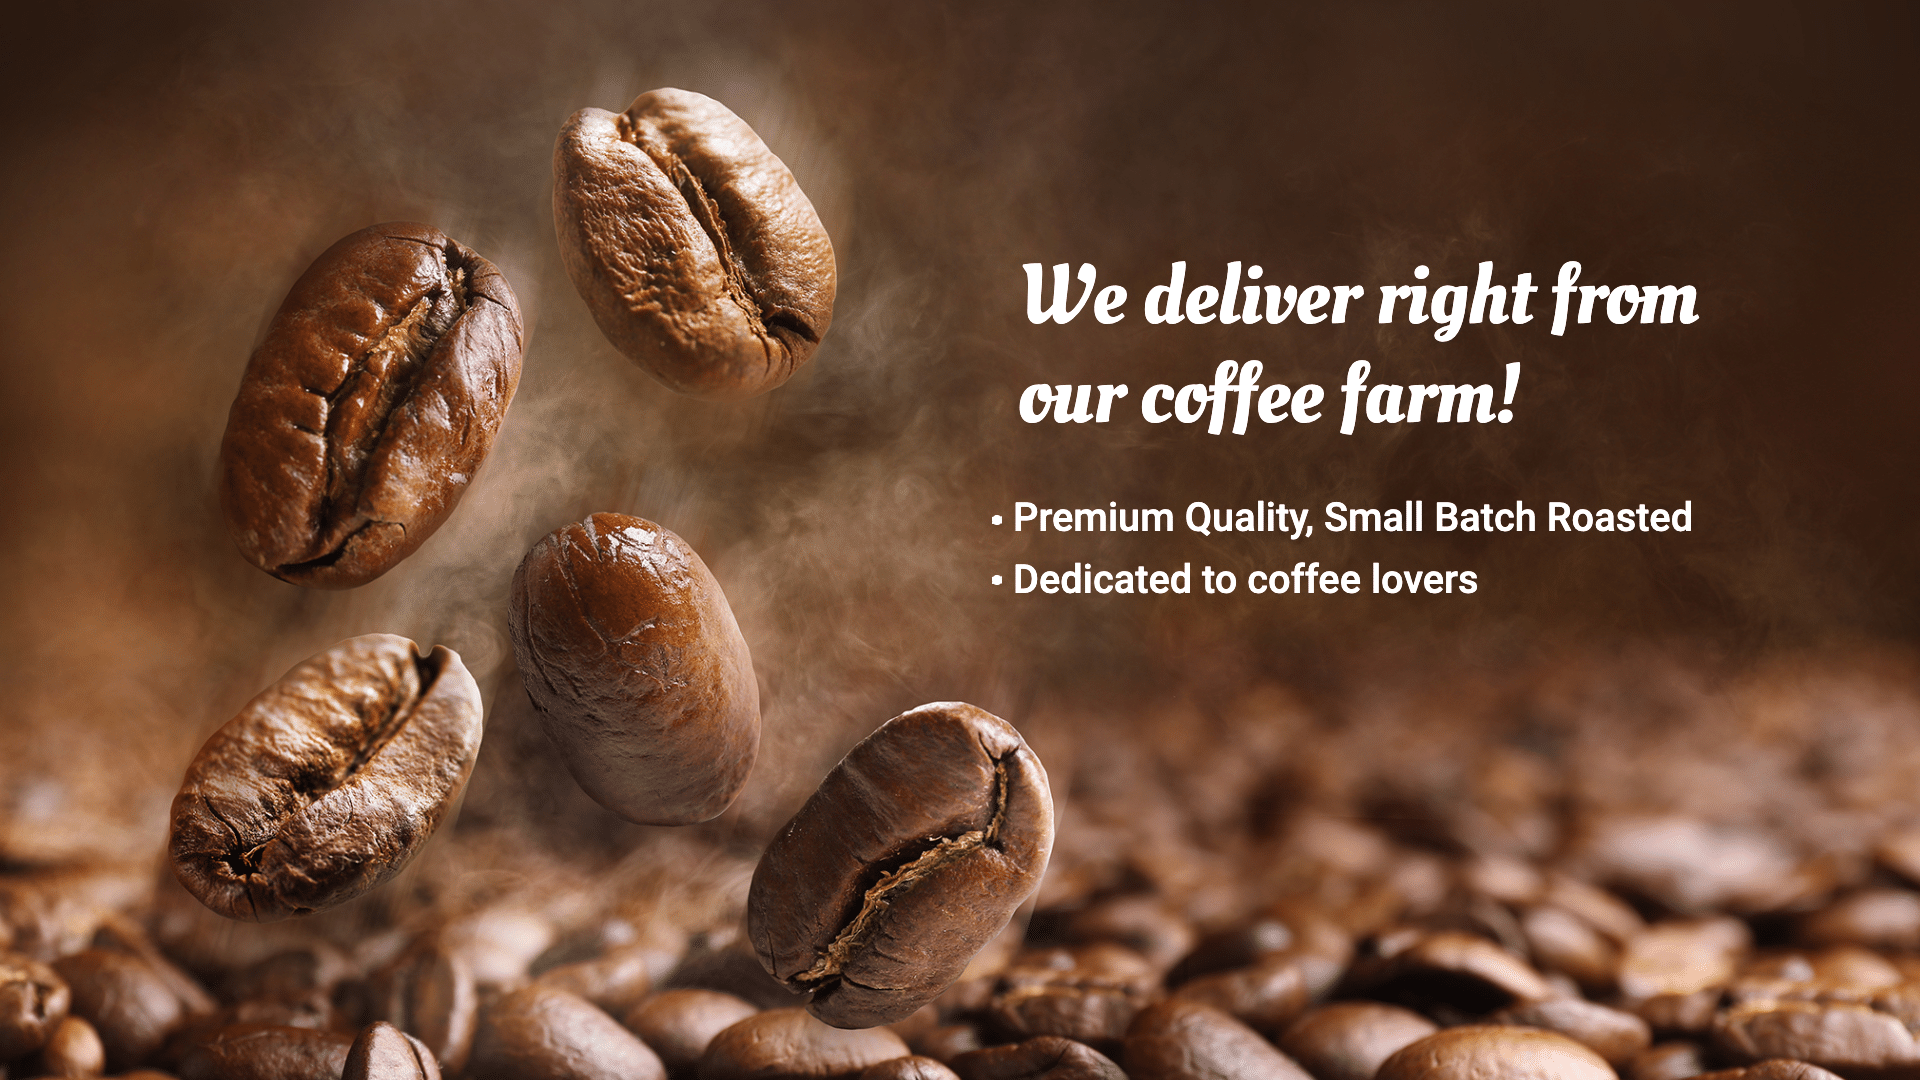 Simple Coffee Beans Delivery Right Service Ecommerce Banner预览效果